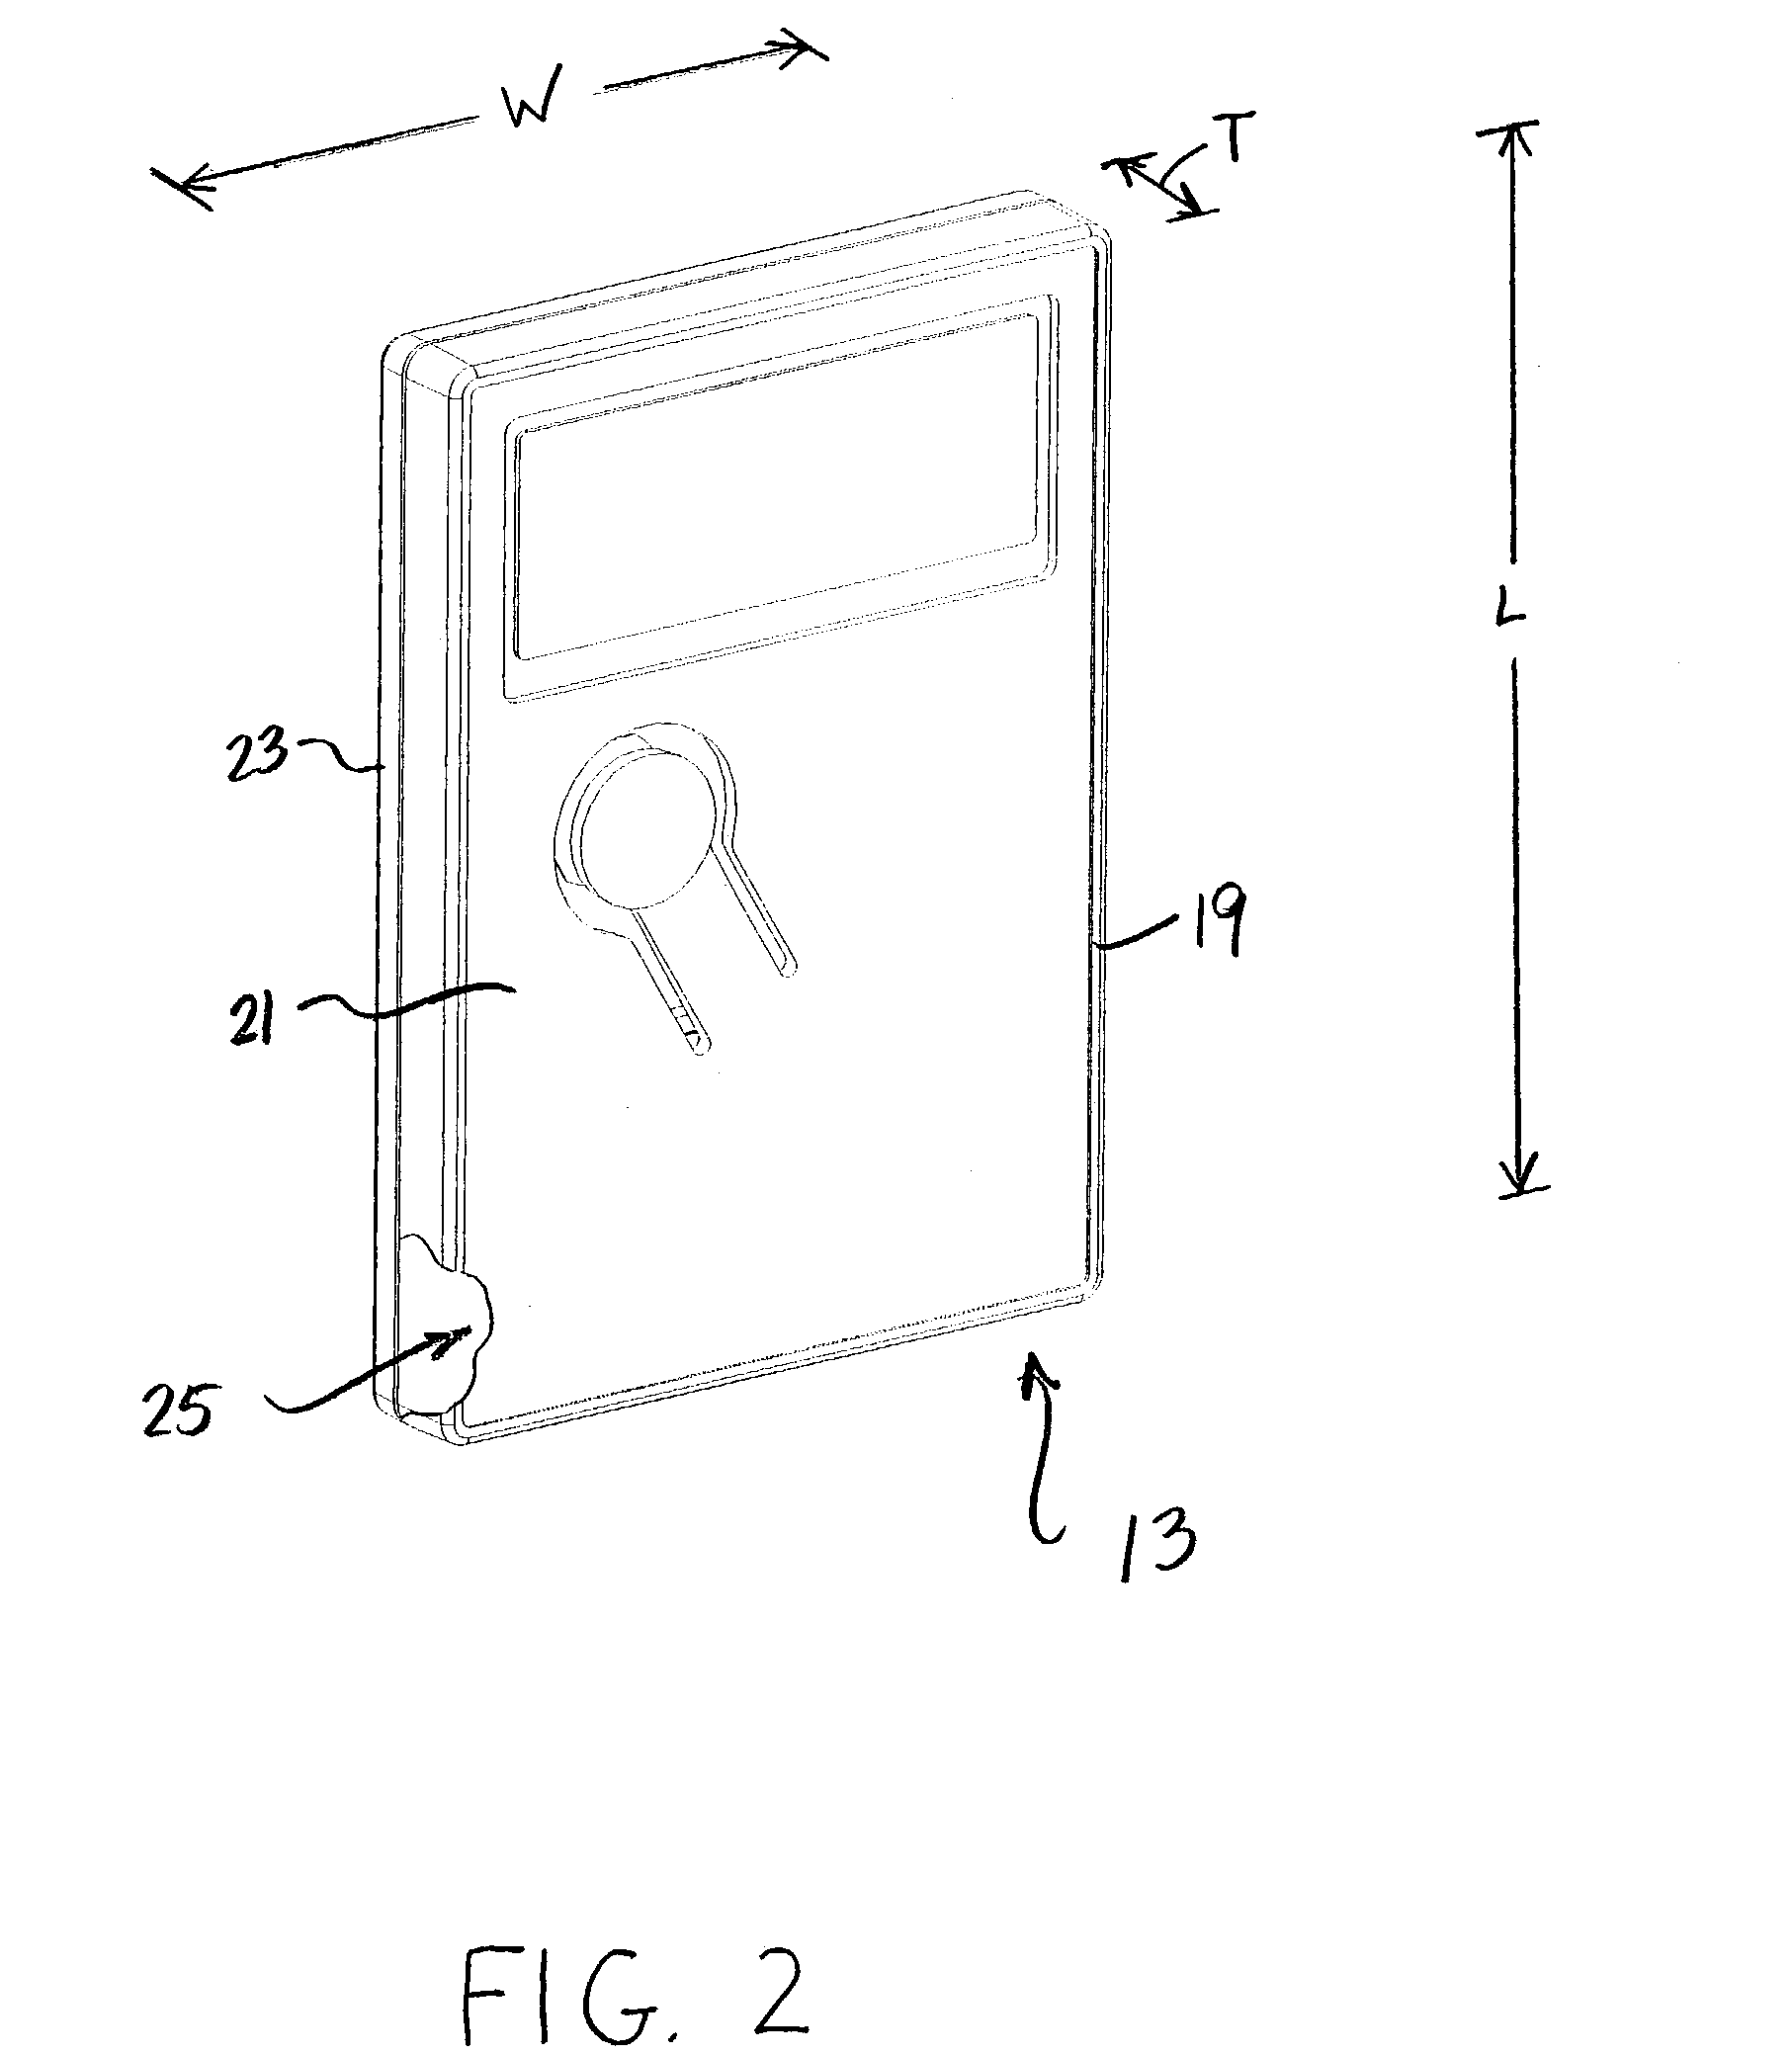 System and method of monitoring temperature